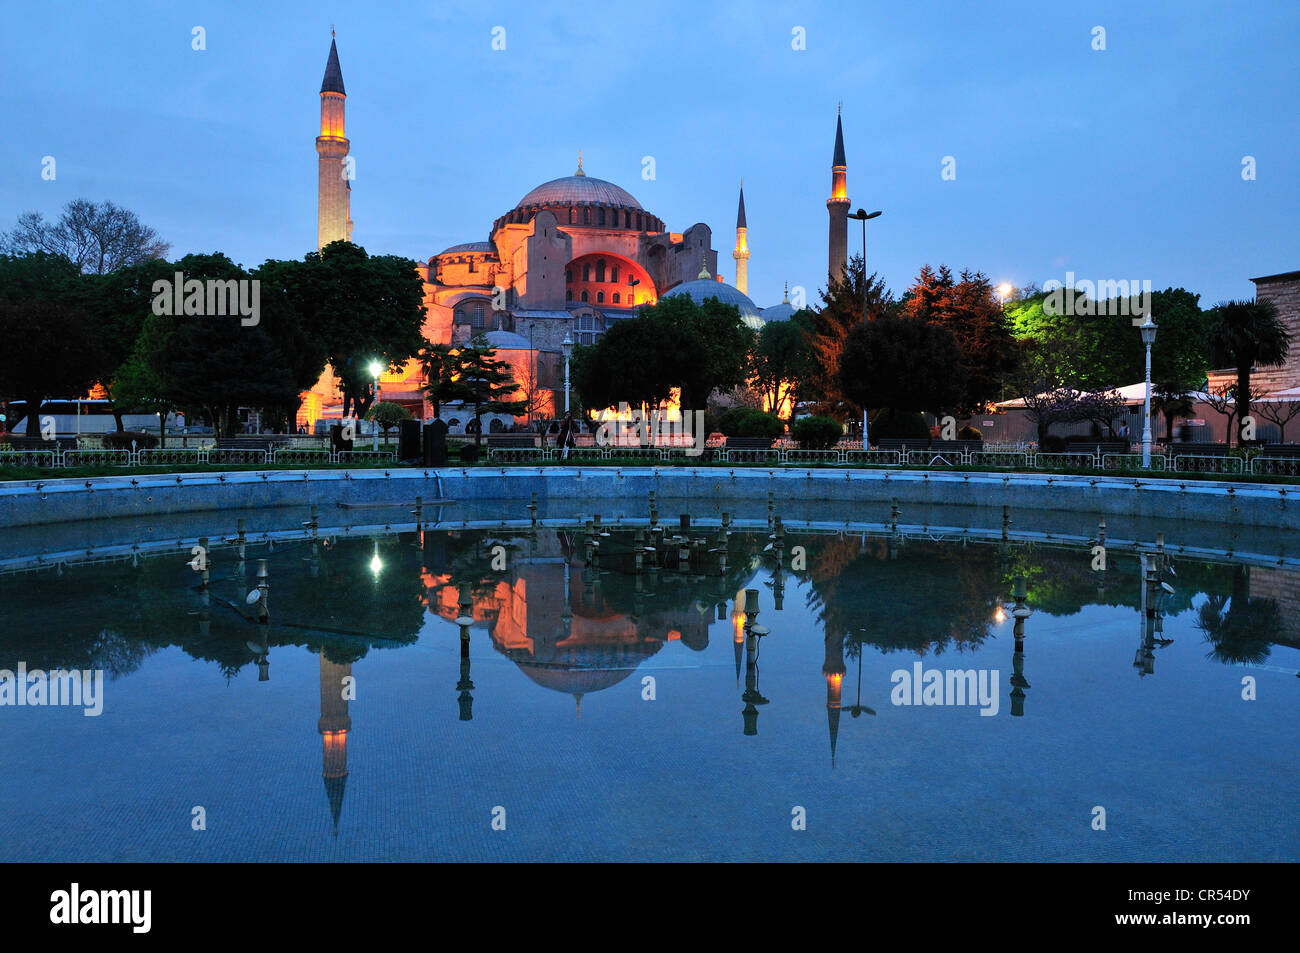 Hagia Sophia or St. Sophia, once a Byzantine church, later a mosque and now a museum, in the last light of the day, Istanbul Stock Photo